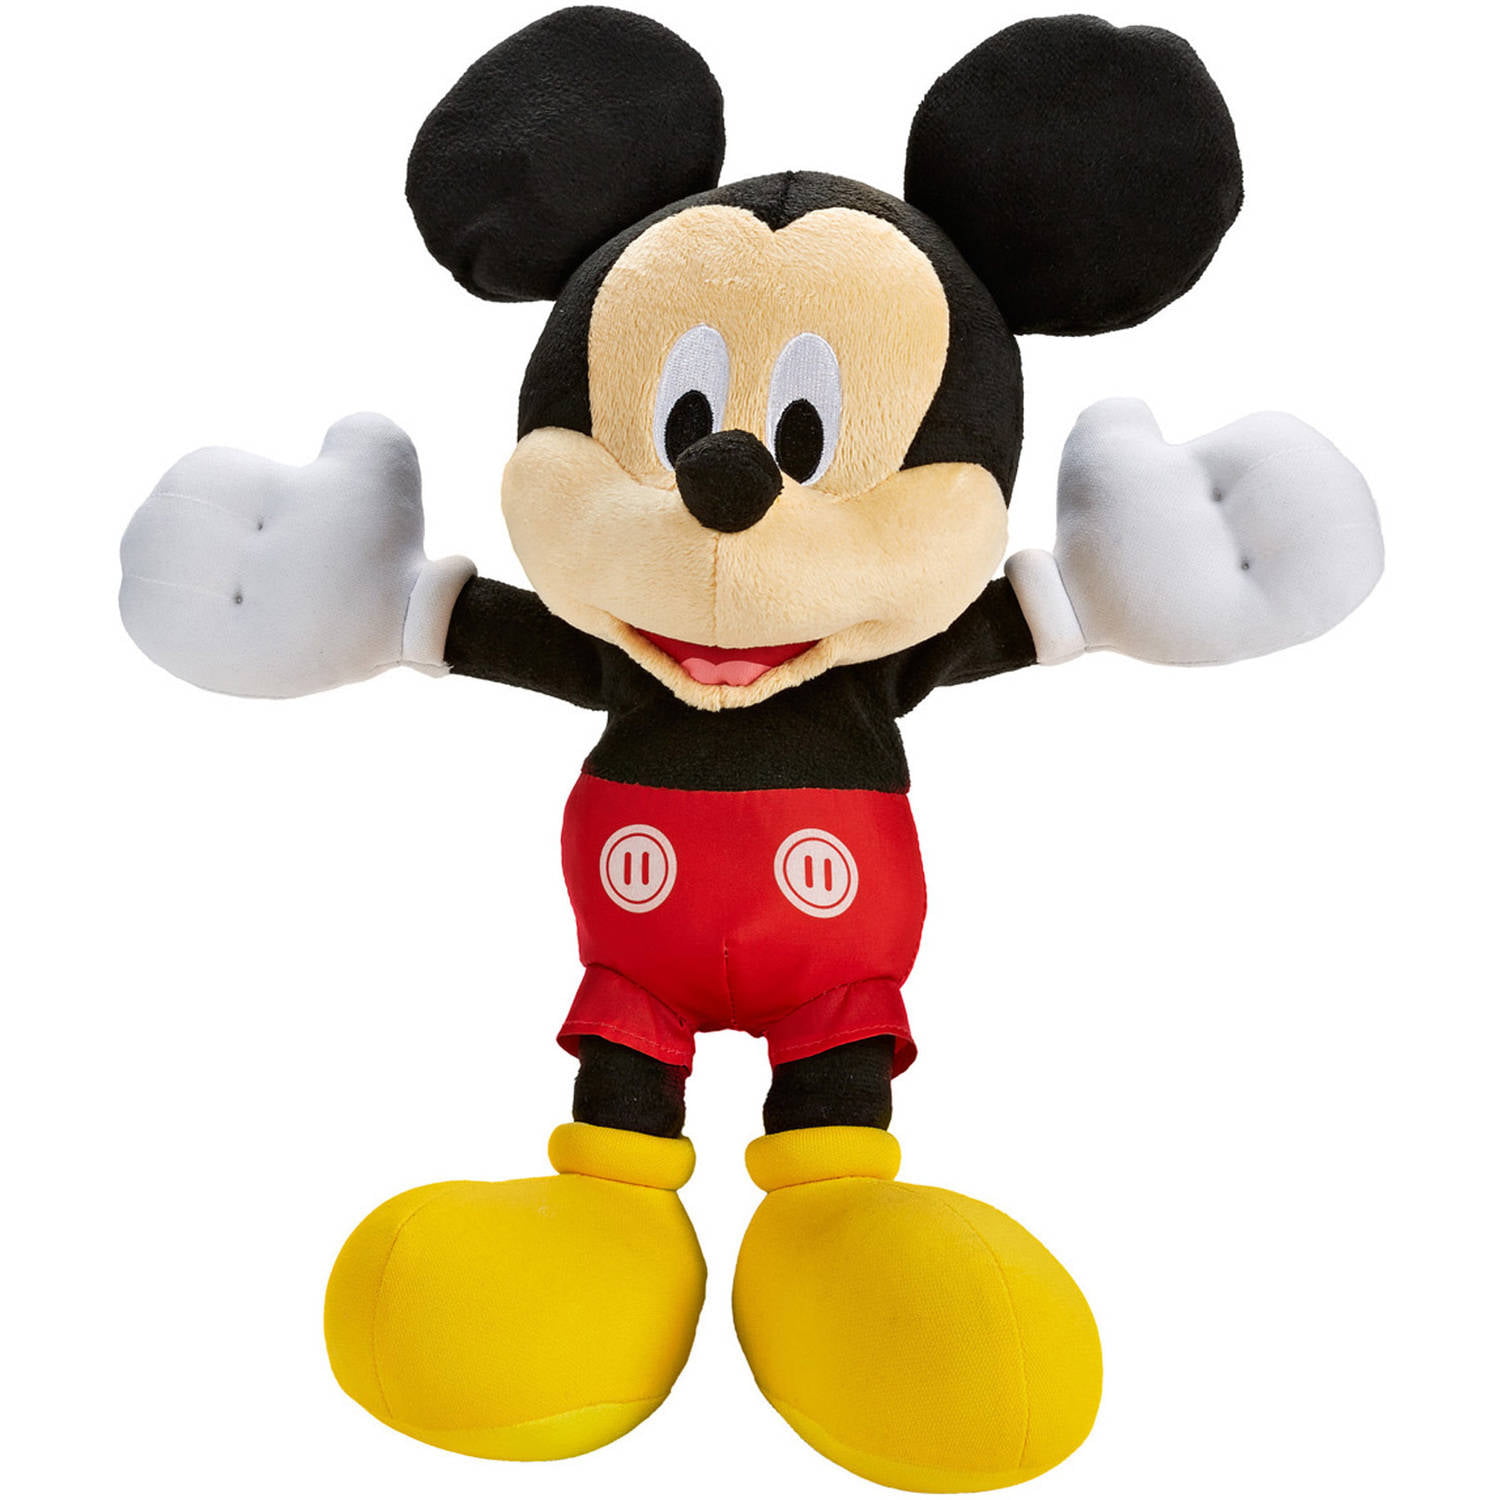 Disney's Squish: Mickey Mouse Clubhouse Lets Kids Sculpt Crazy